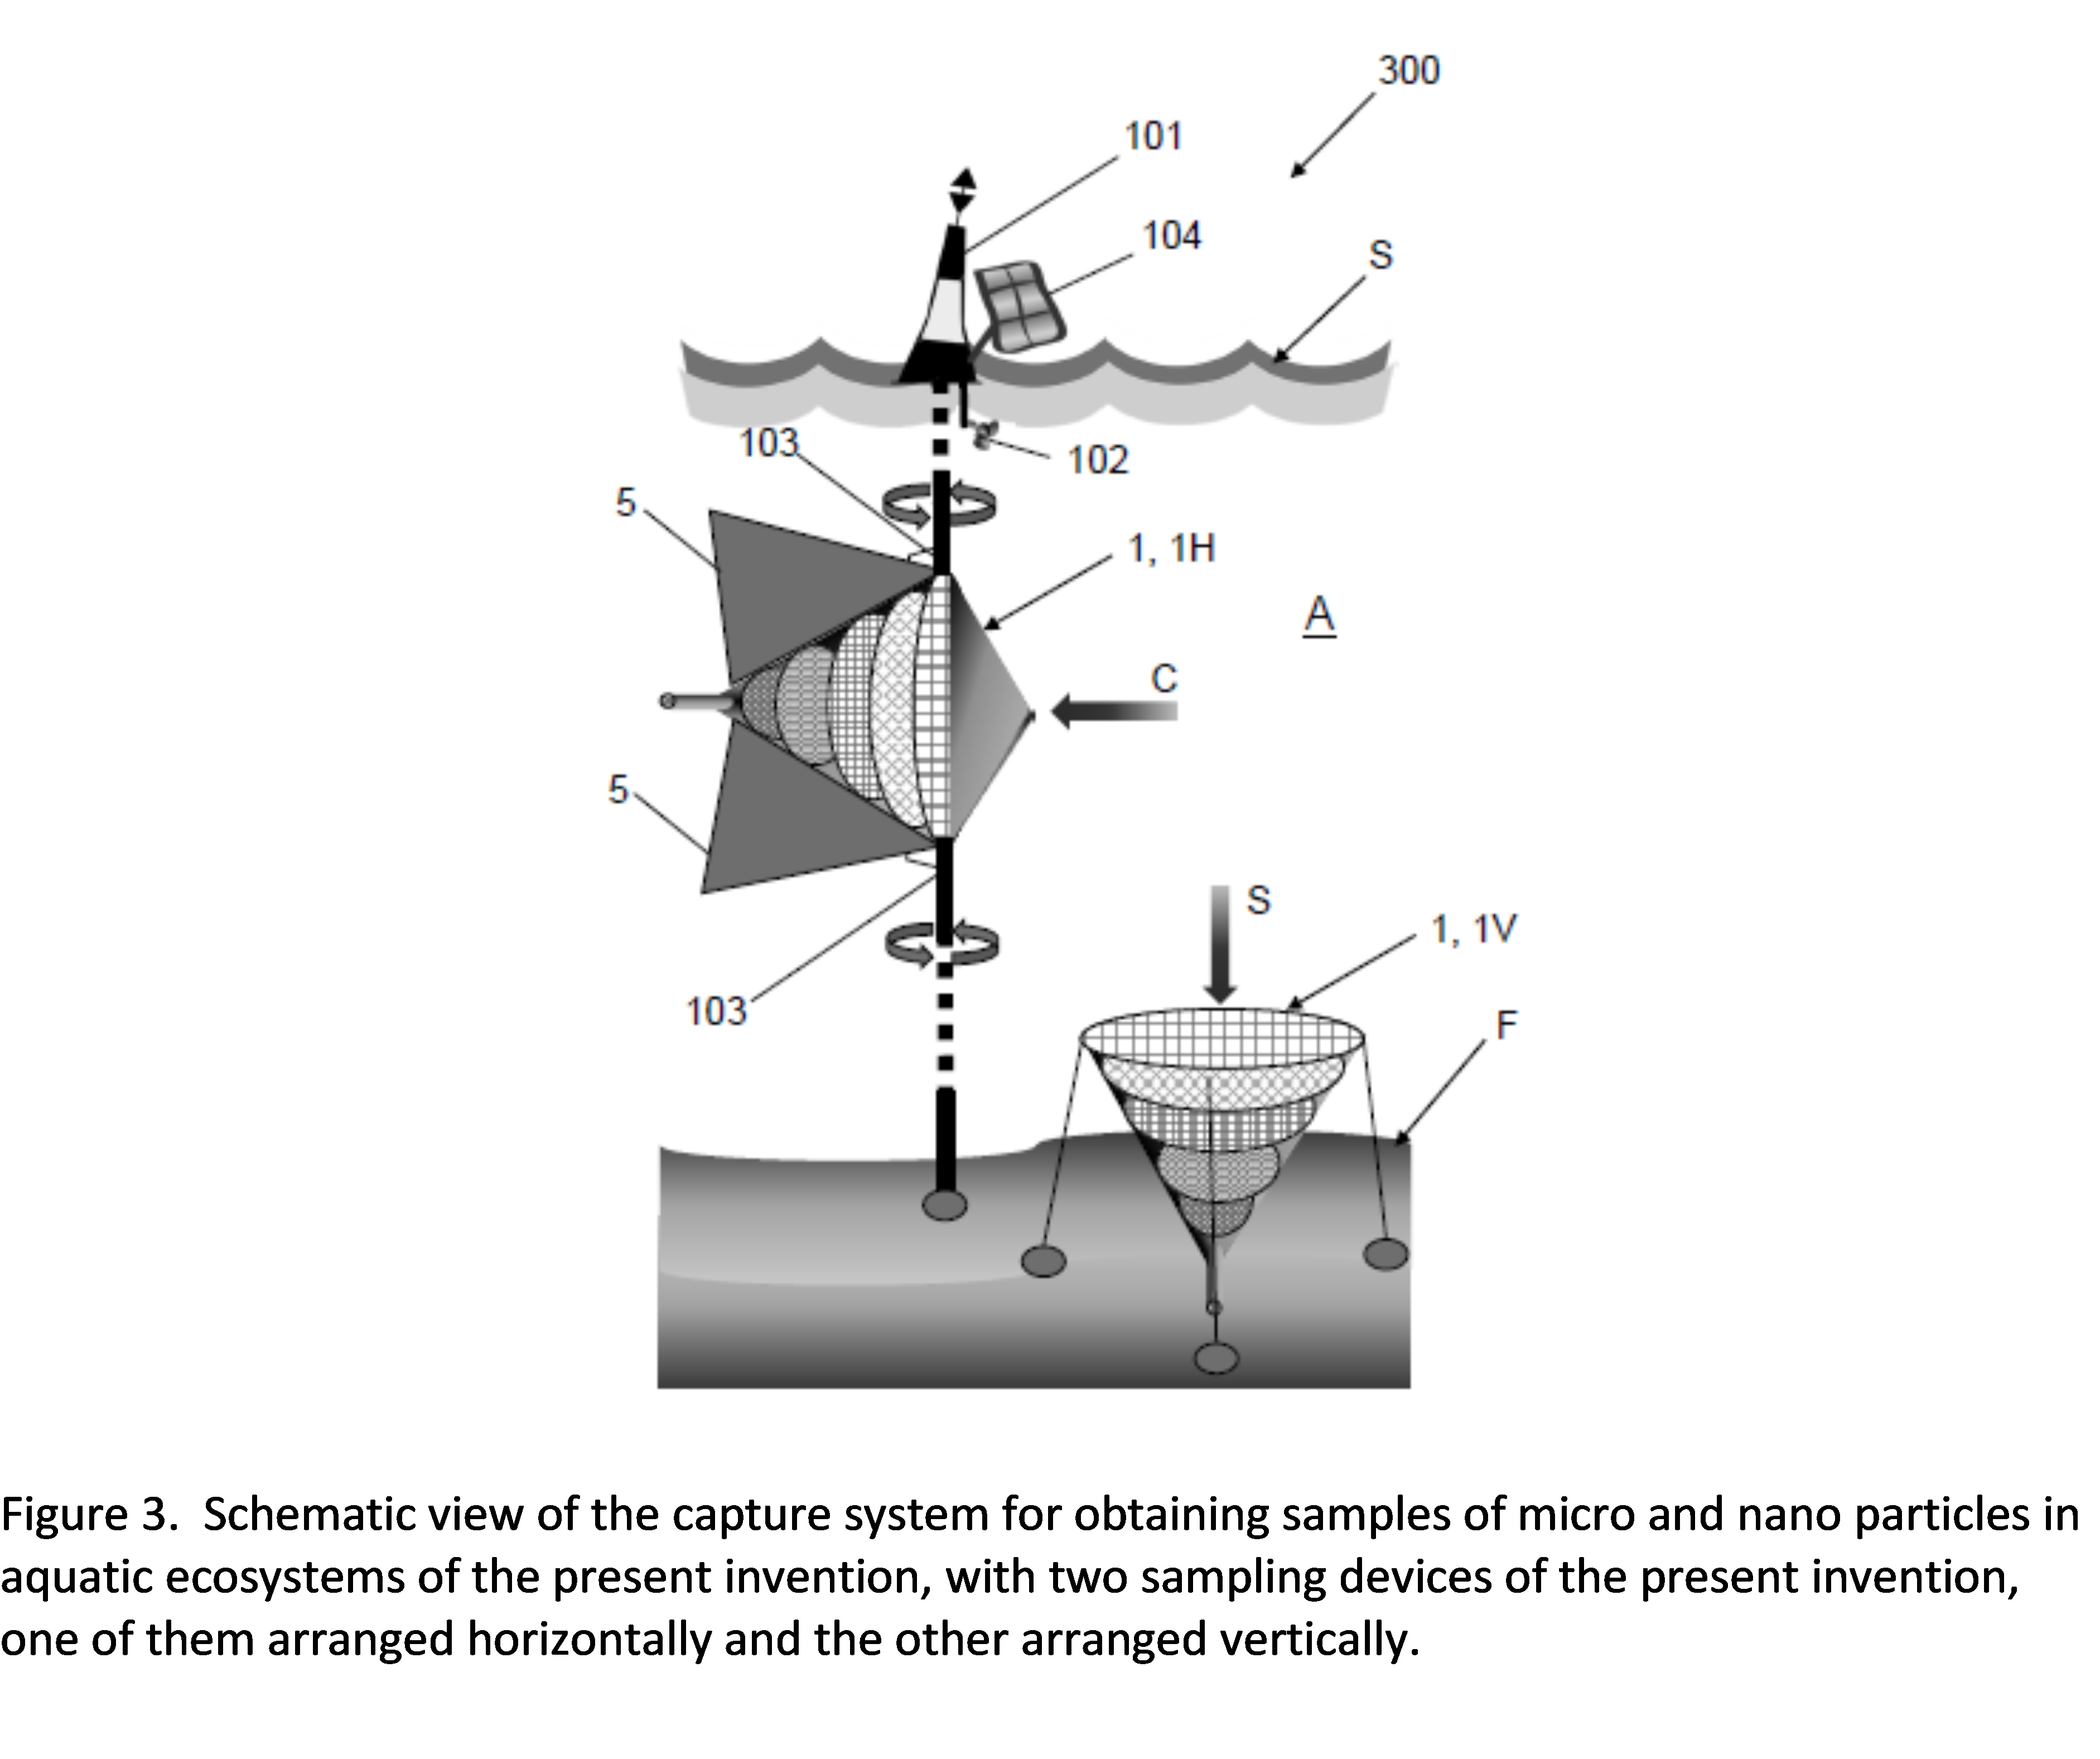 Micro and nanoparticle sampling device in aquatic ecosystems and collection system associated